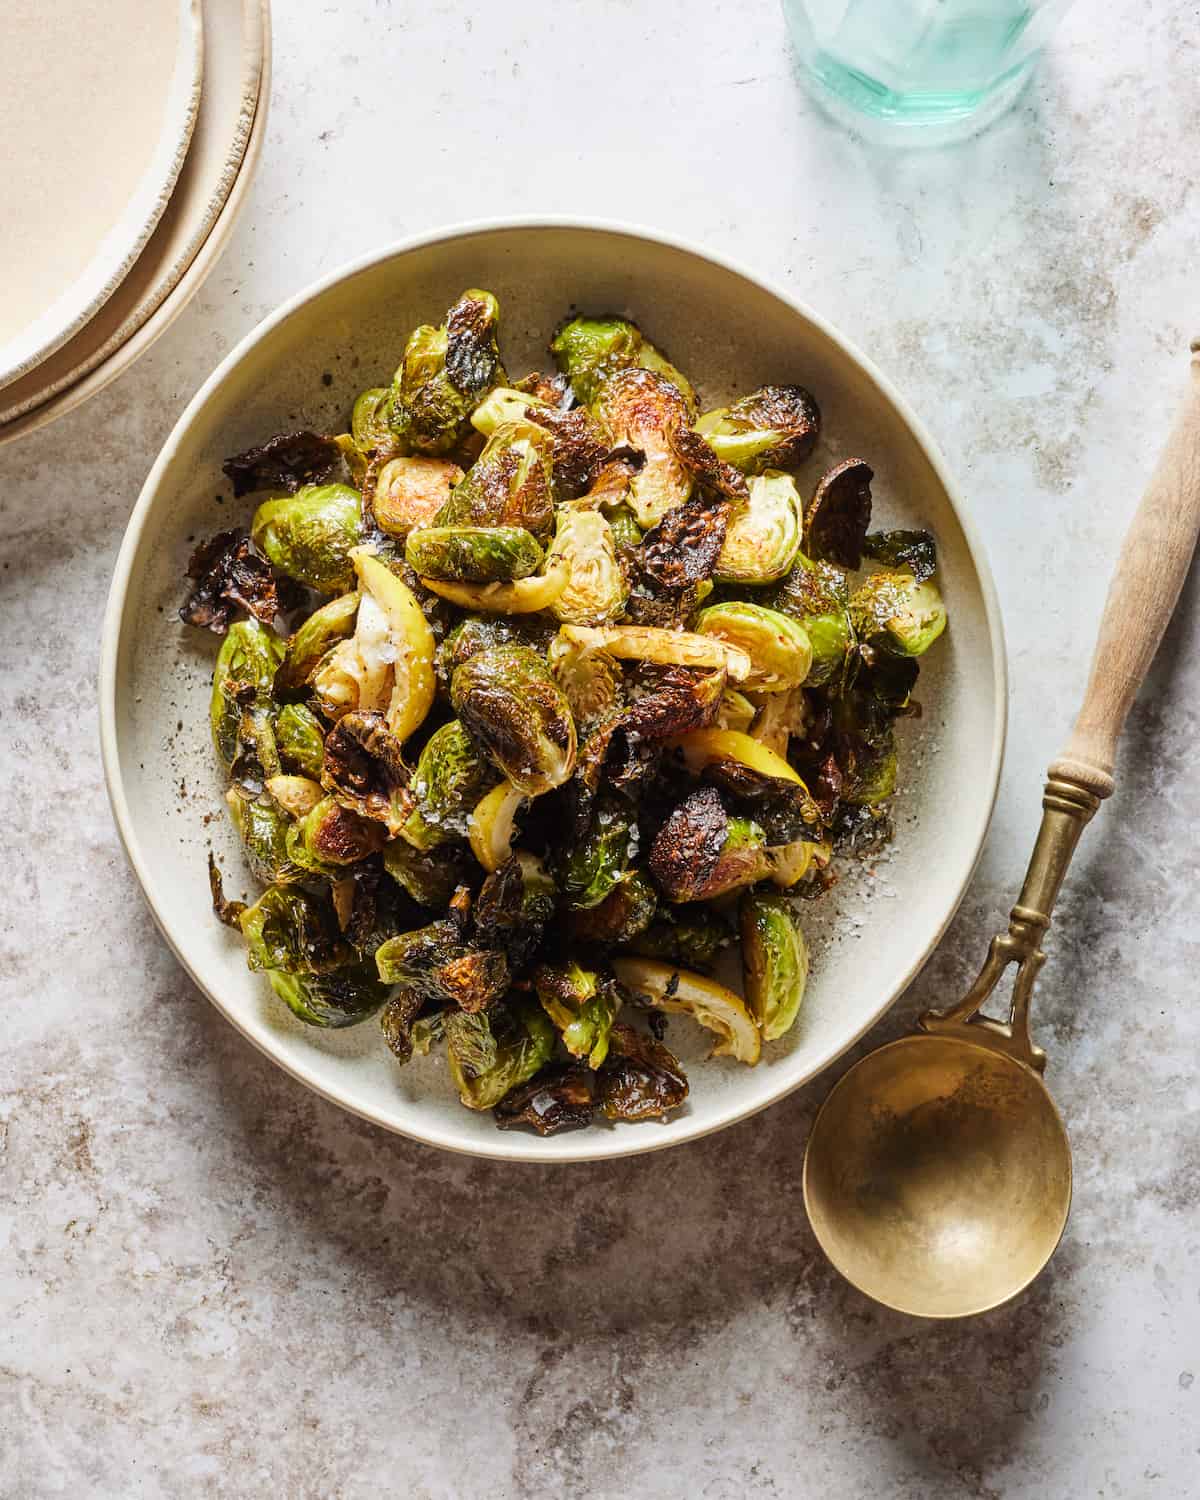 A round flat dish with crispy roasted brussels sprouts, with a golden serving spoon on the side.